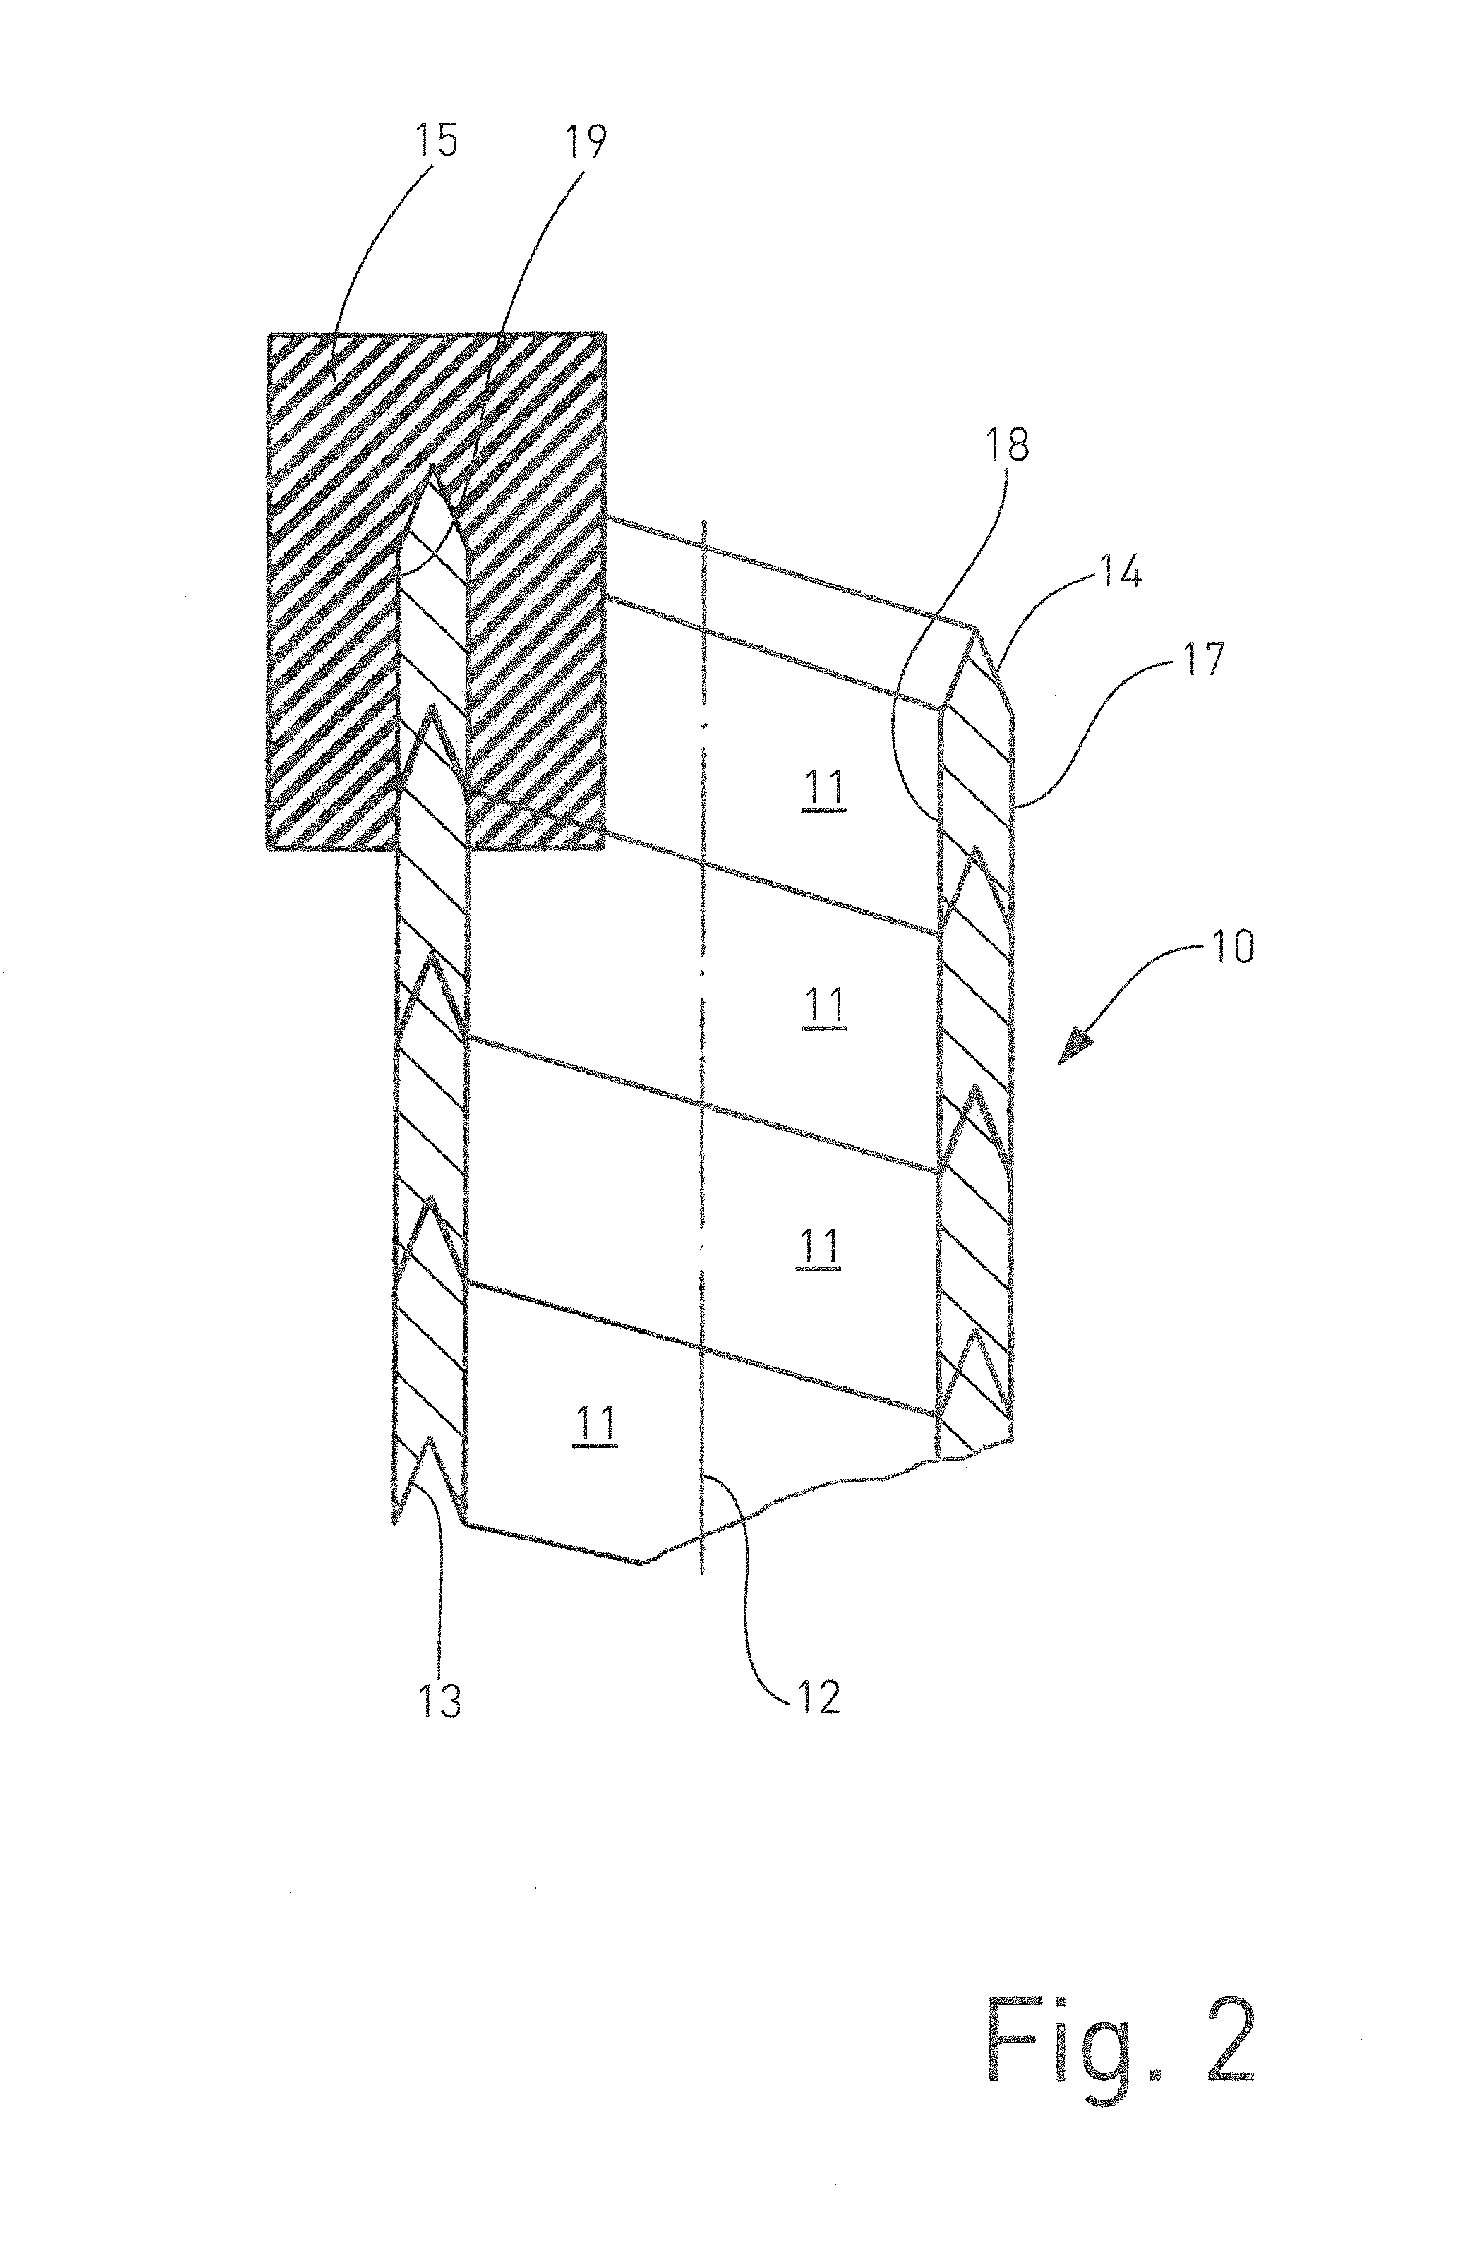 Process for producing a reinforced plastic article